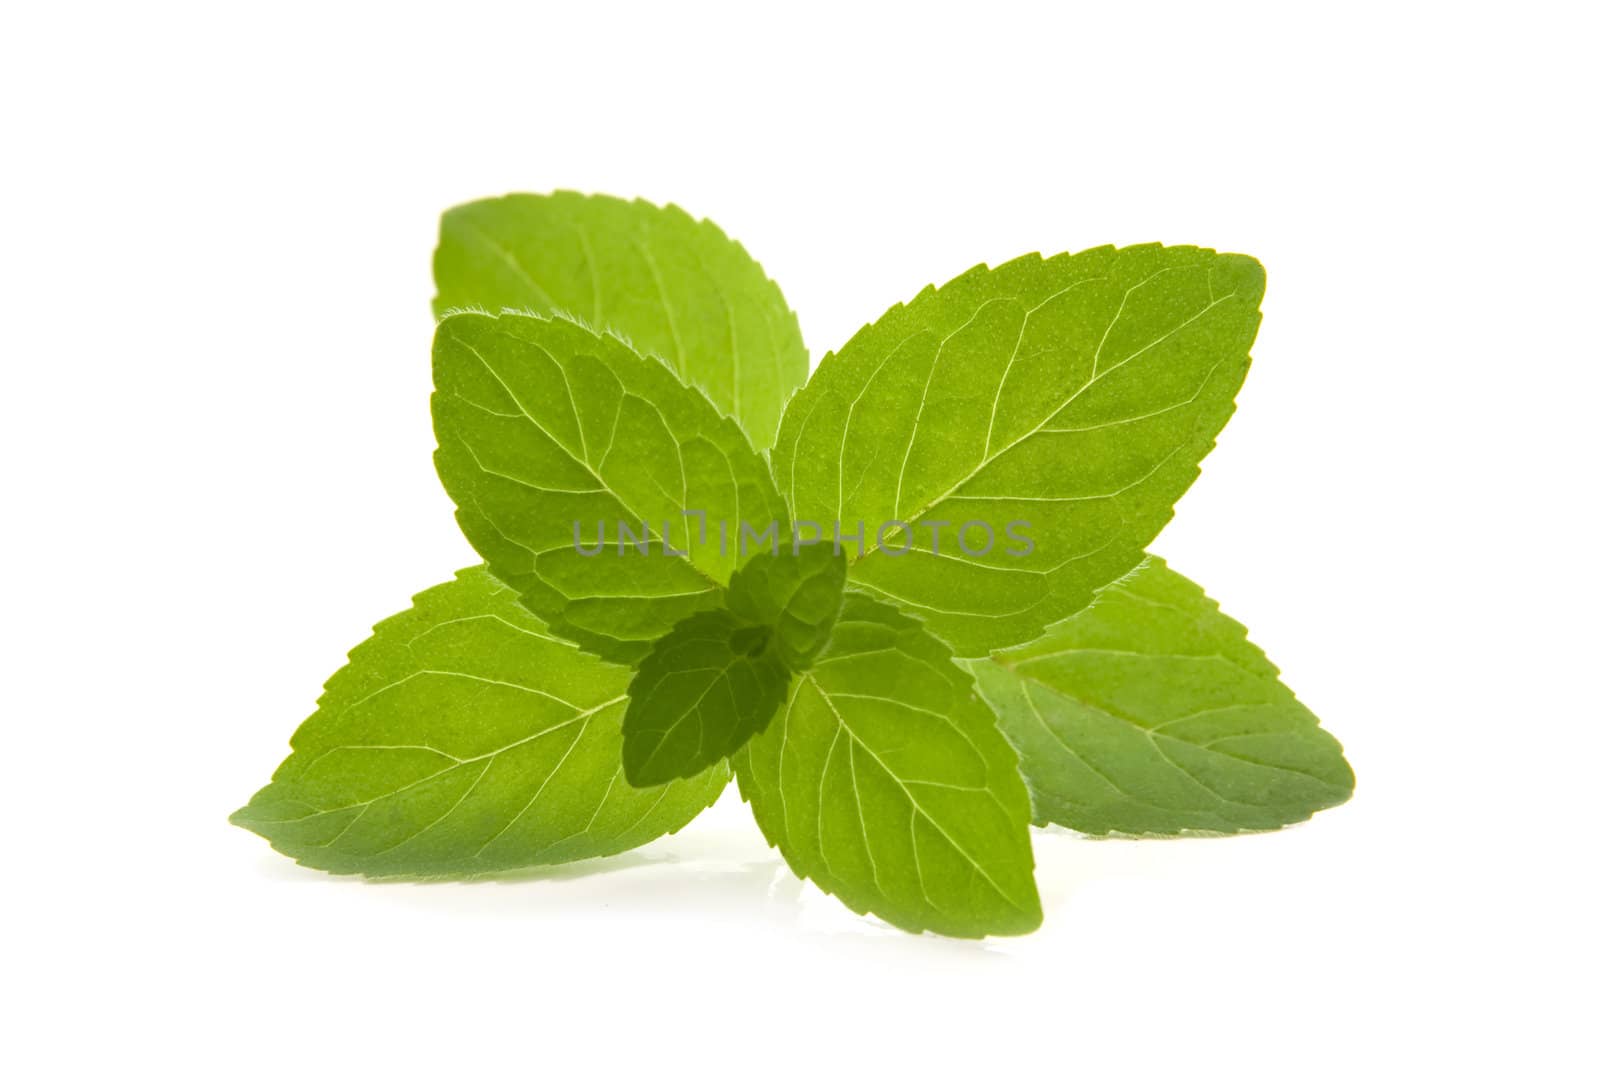 spearmint branch on white background isolated. by artisanua